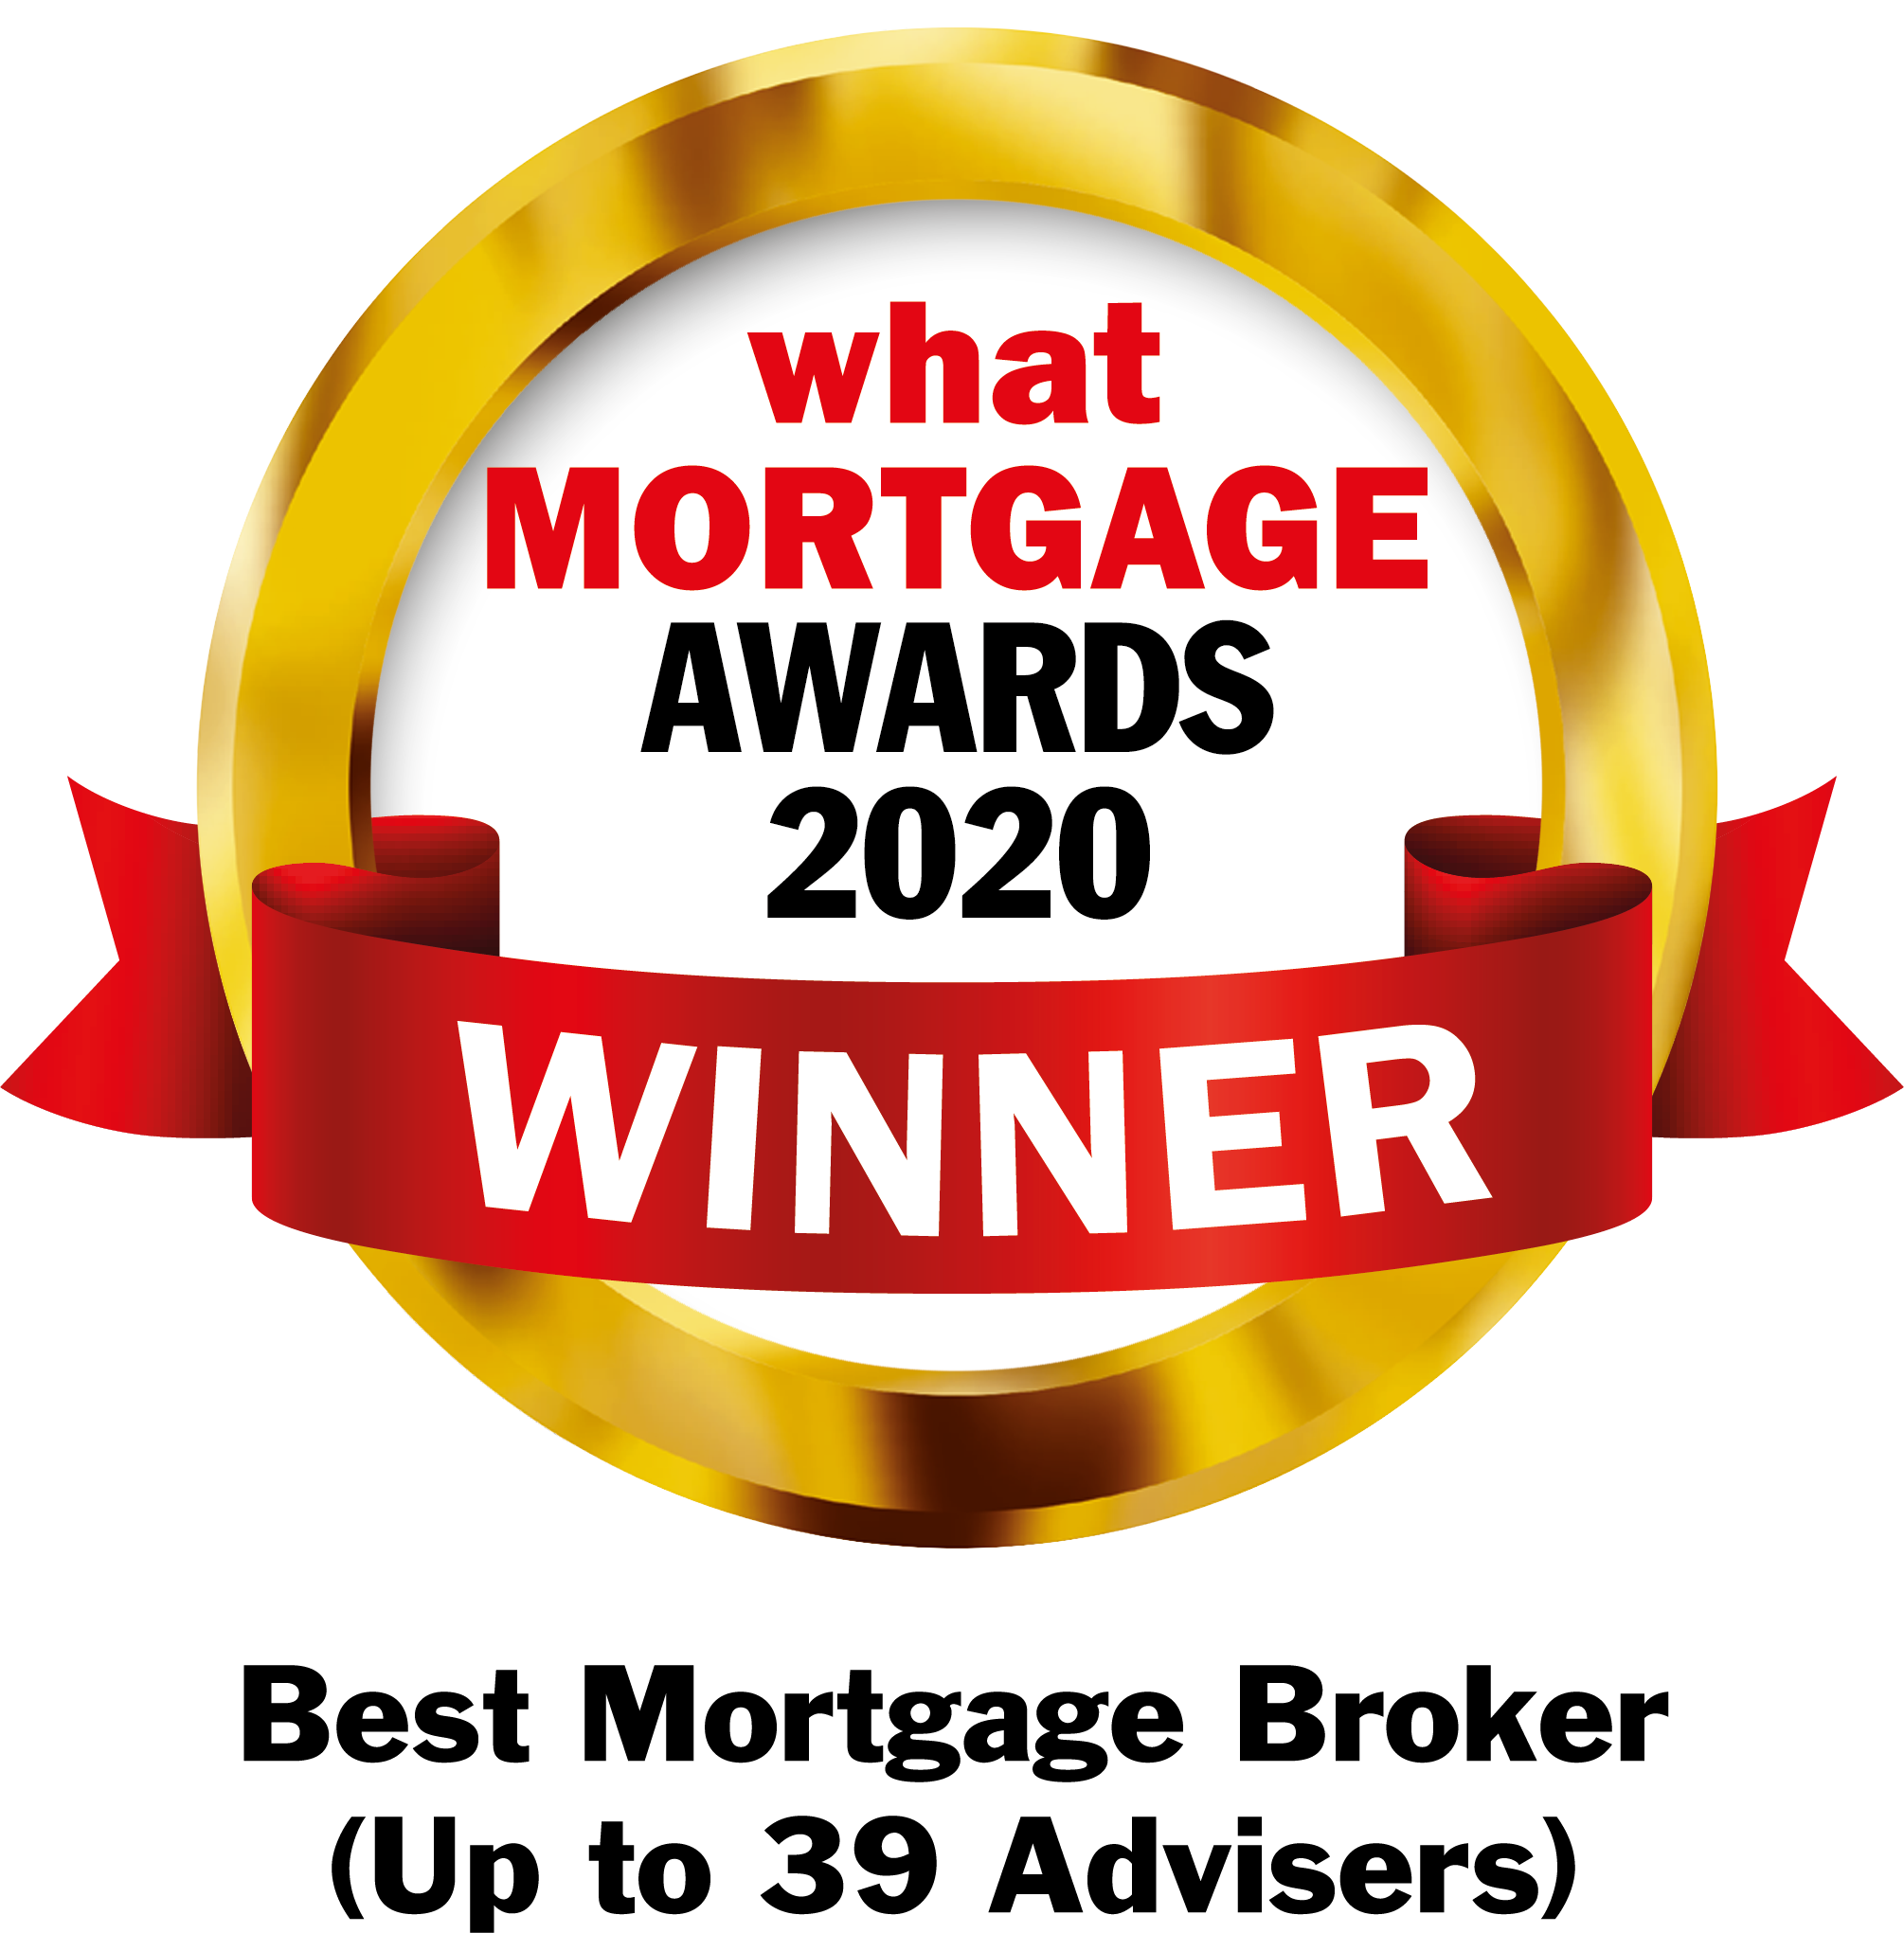 What Mortgage Awards 2020